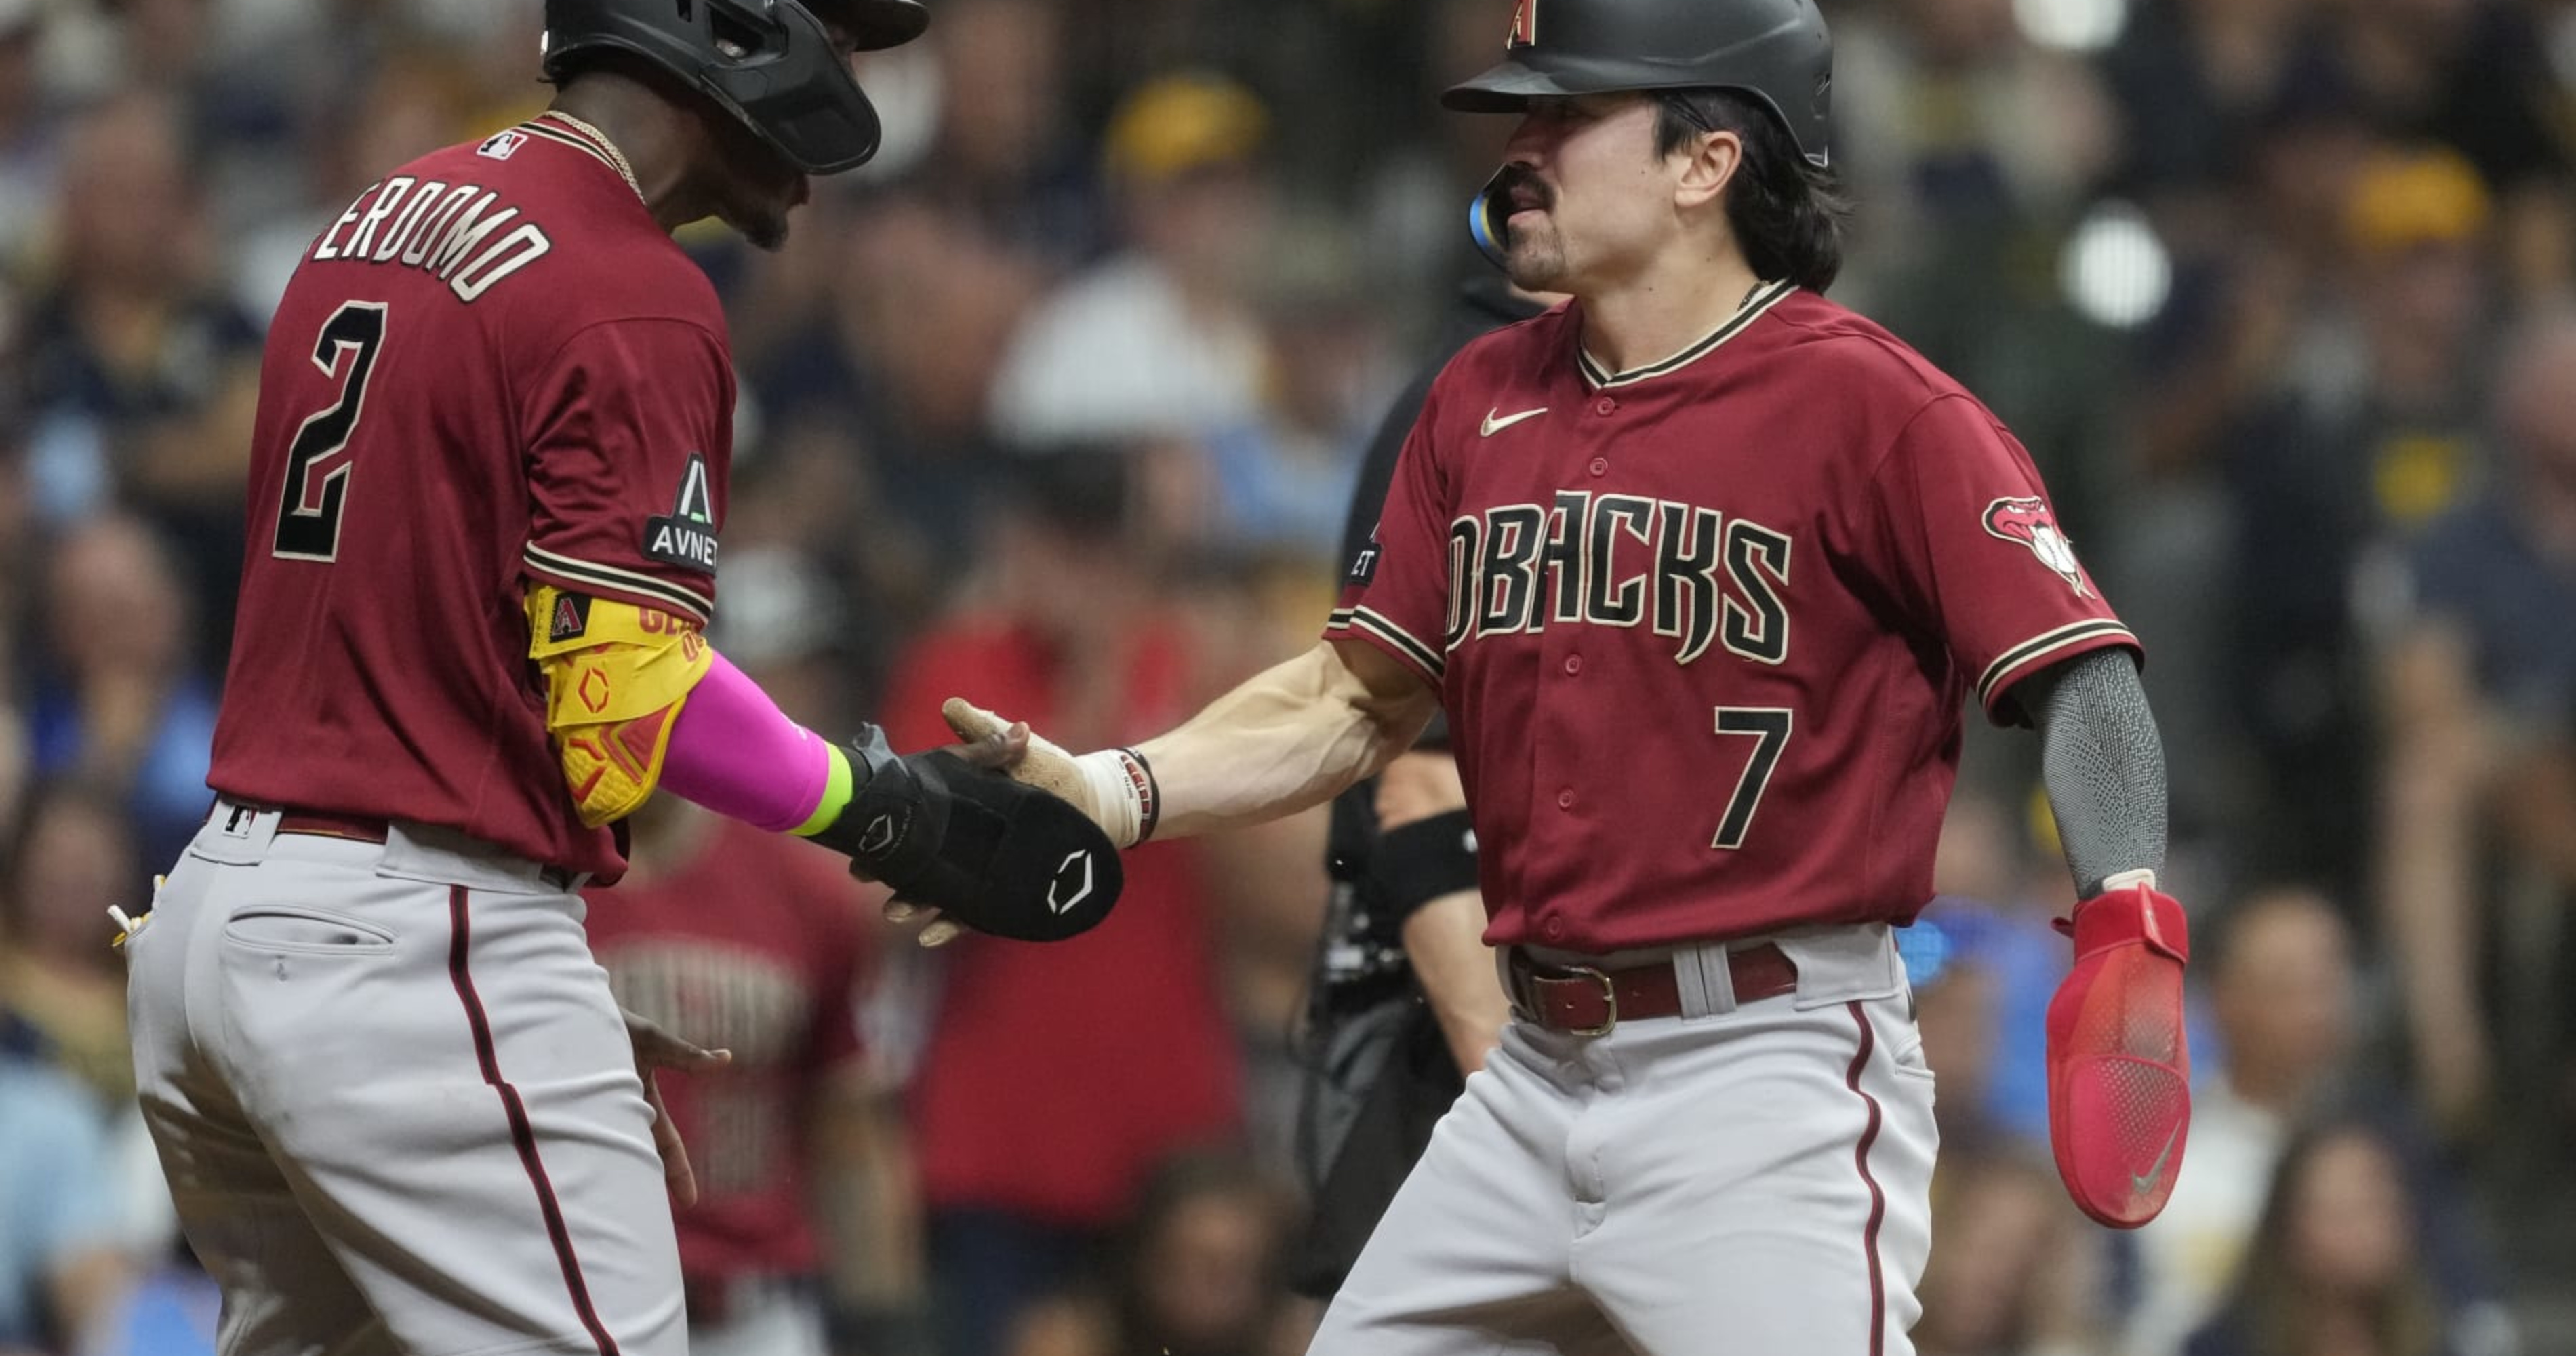 Diamondbacks vs. Dodgers Early Odds and Preview for NLDS After Wild